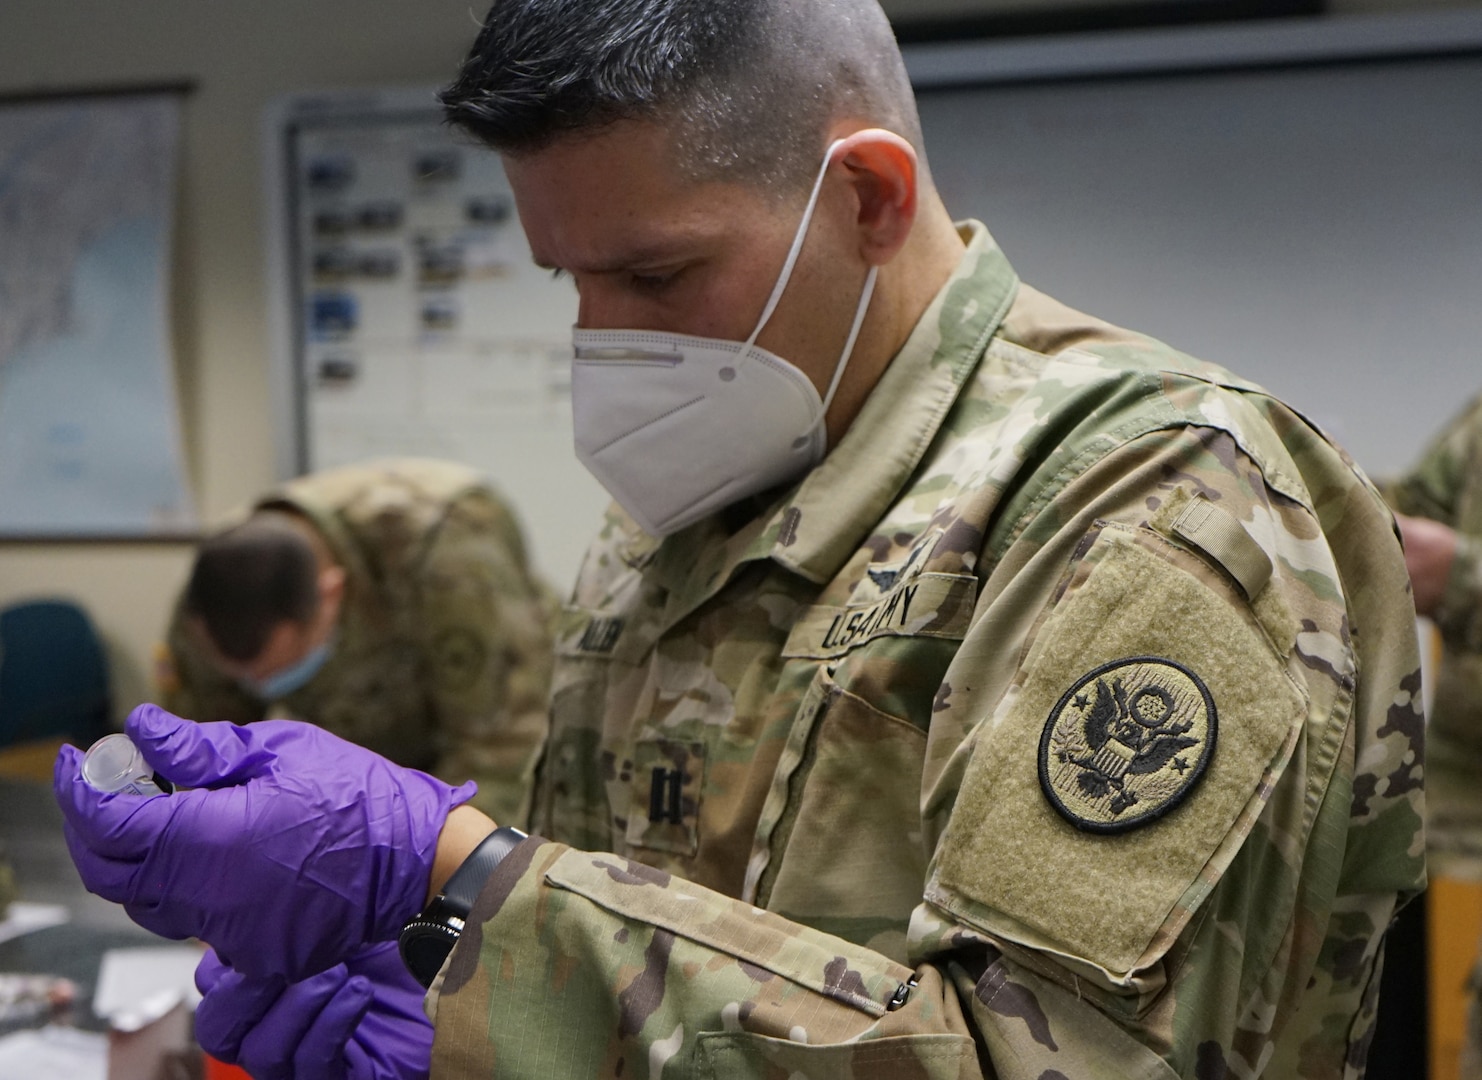 Capt. Cesar Allen, medical officer with the 3rd Civil Support Team (Weapons of Mass Destruction), Pennsylvania National Guard, prepares a dose of the Moderna COVID-19 vaccine on Jan. 13, 2021, at Fort Indiantown Gap, Pa.